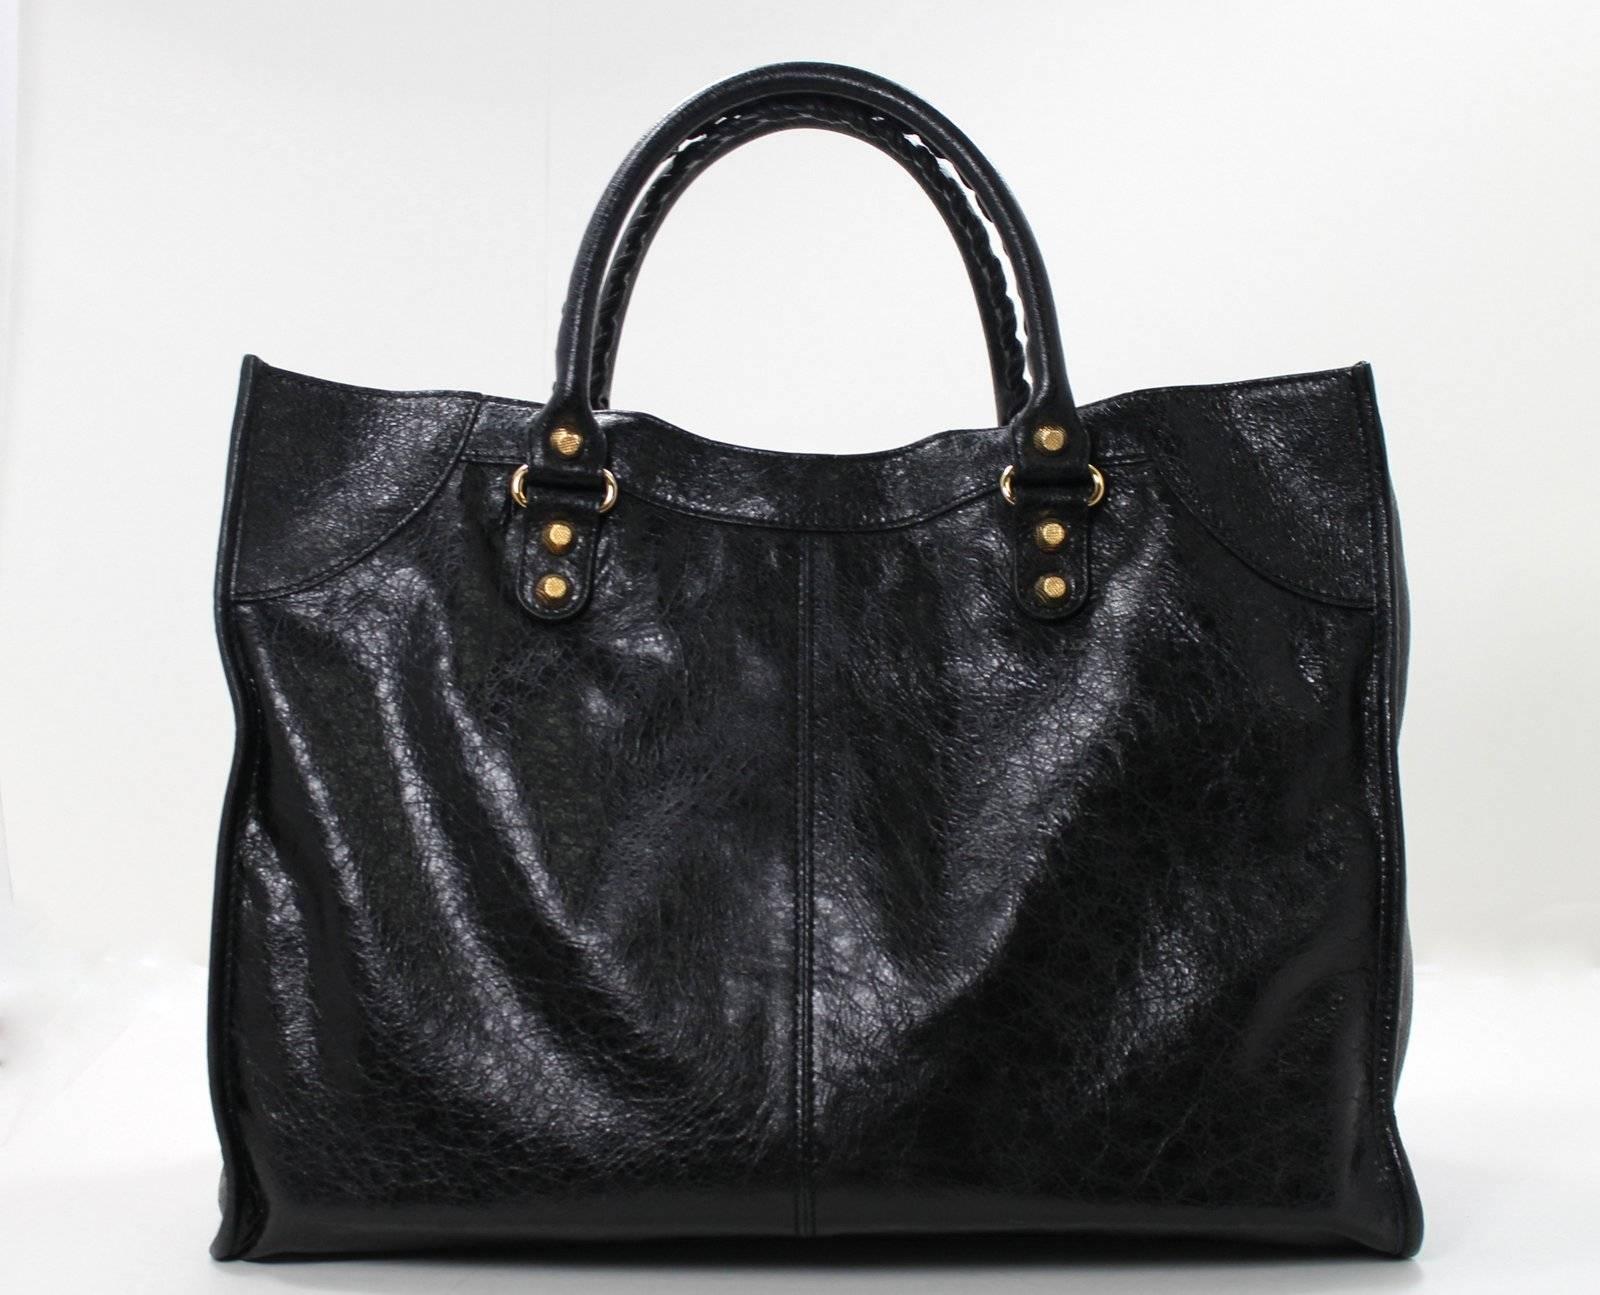 Balenciaga BLACK Lambskin Monday Bag with GIANT Gold Hardware- NEW; retail $2,095.00 plus taxes
The iconic Balenciaga silhouette is recreated each season in exciting colors and varied shapes.   The Monday Tote resembles a proportionally larger